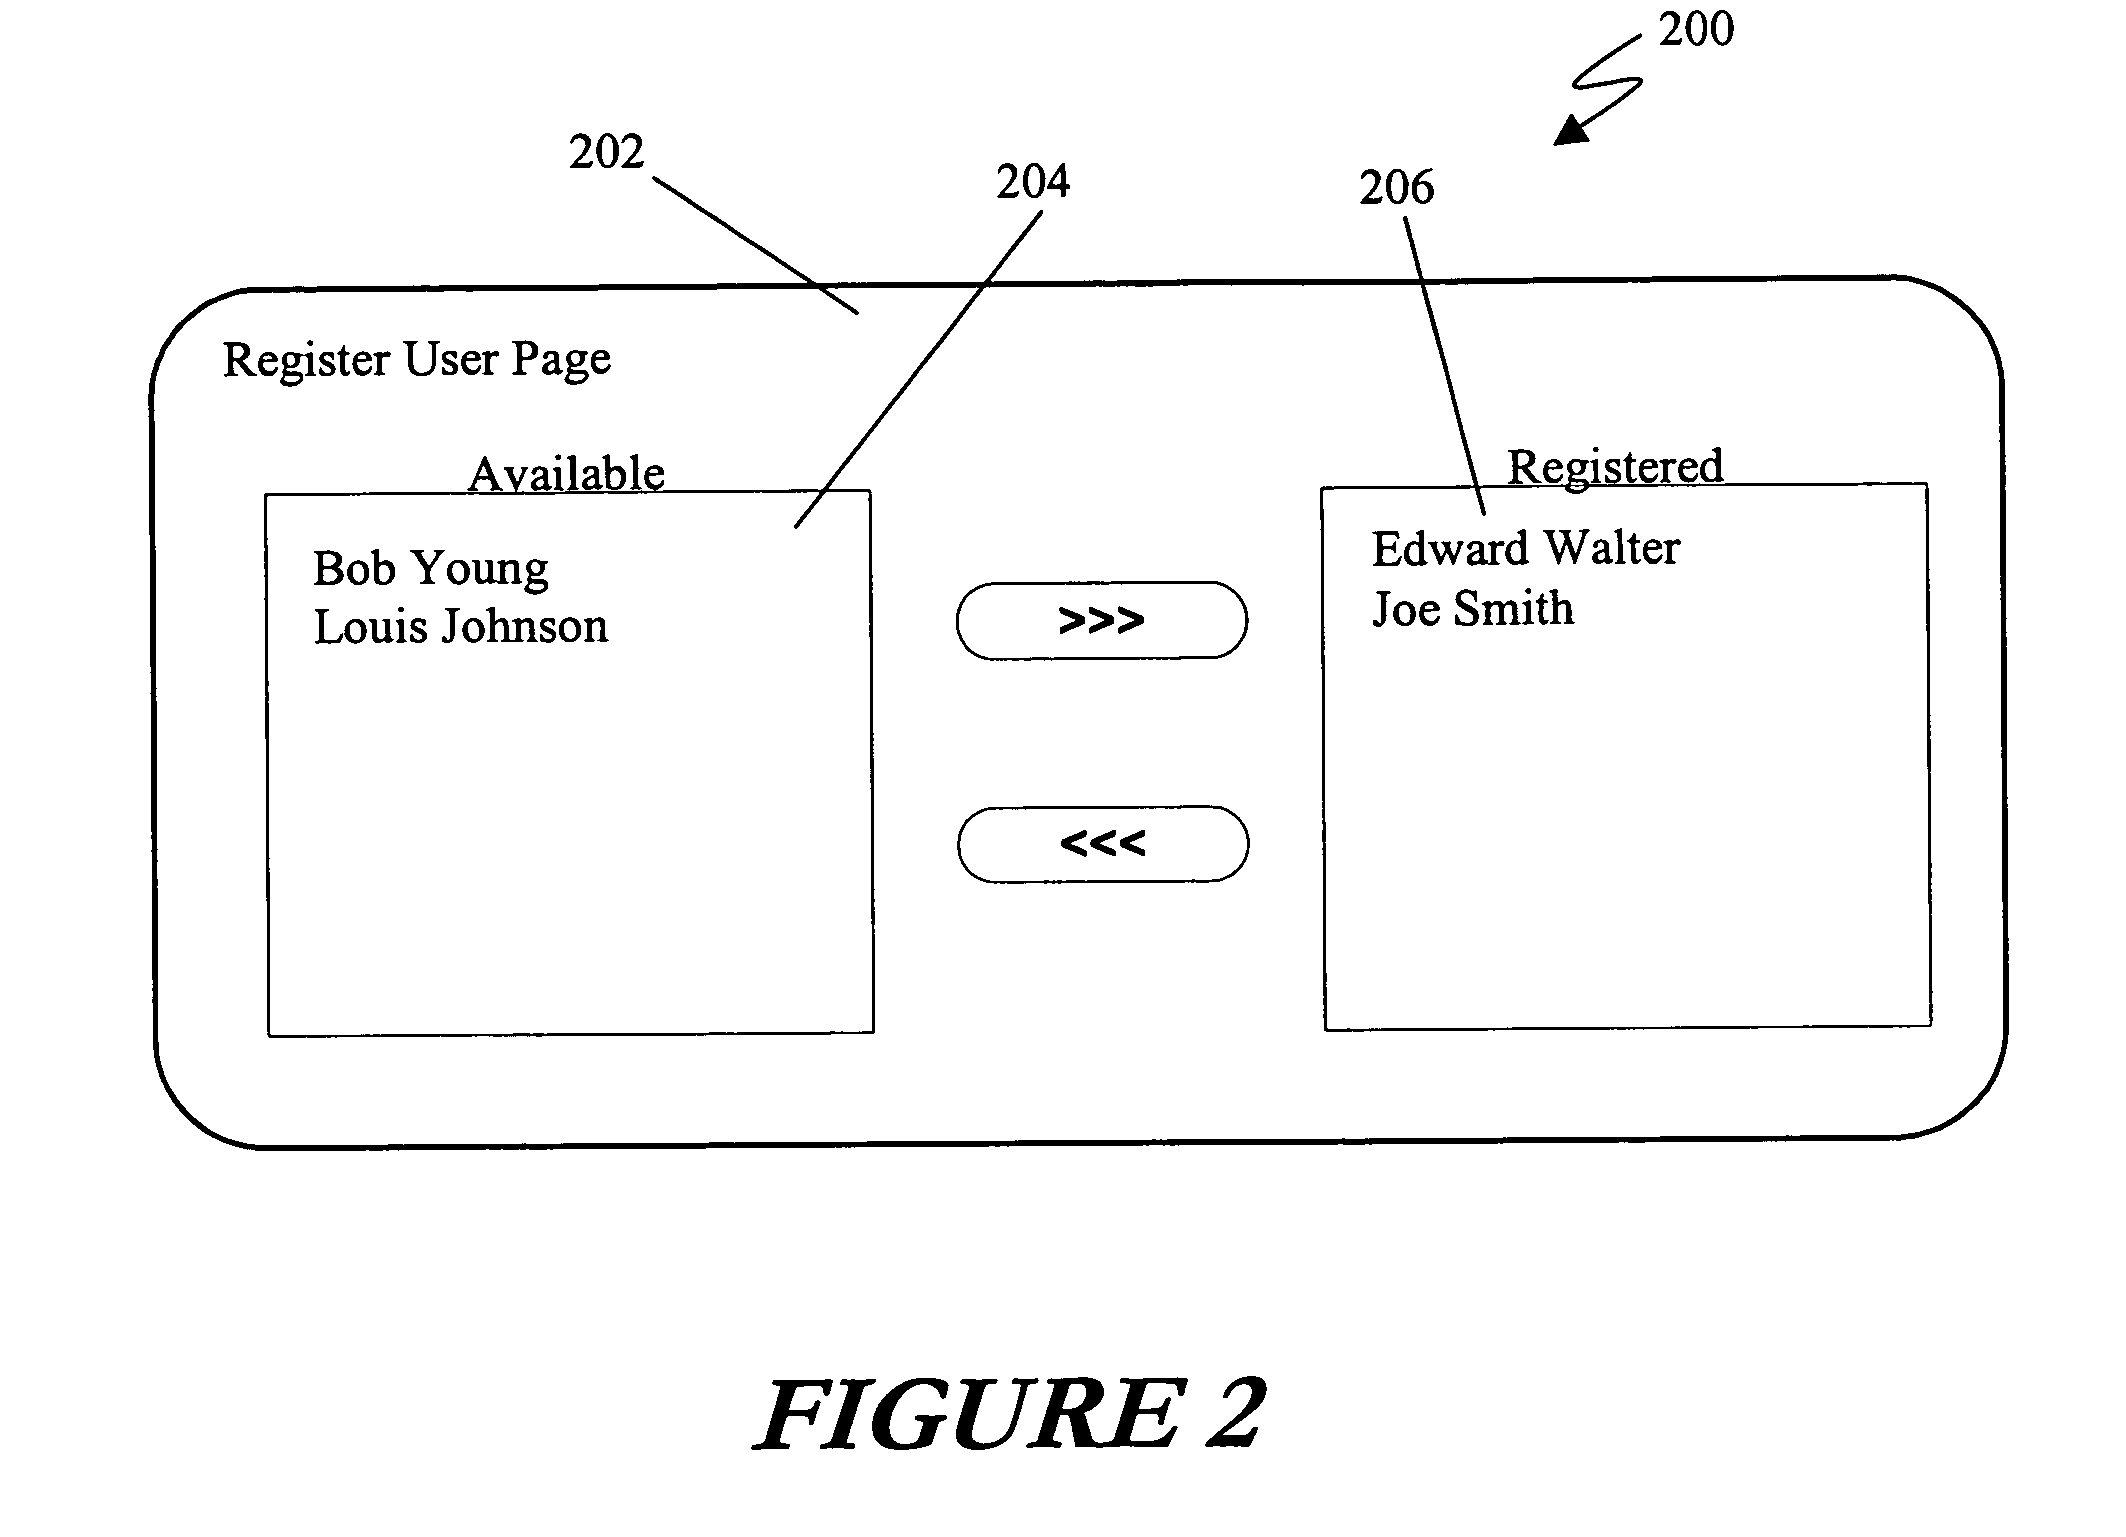 System and method for distributing video conference data over an internet protocol television system